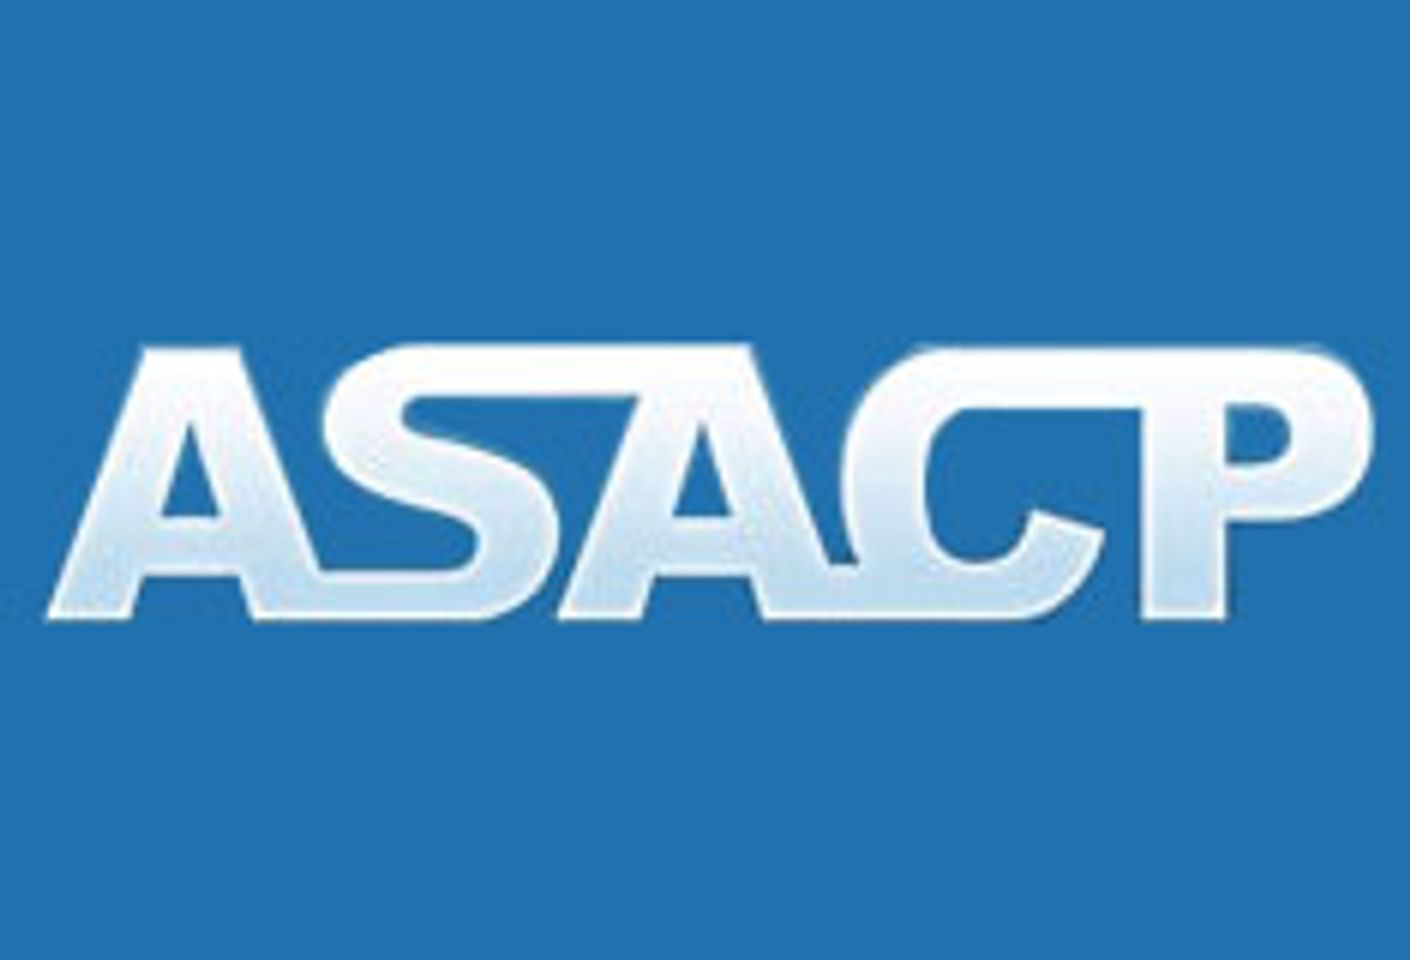 ASACP to Participate in Digital Coast Holiday Reception